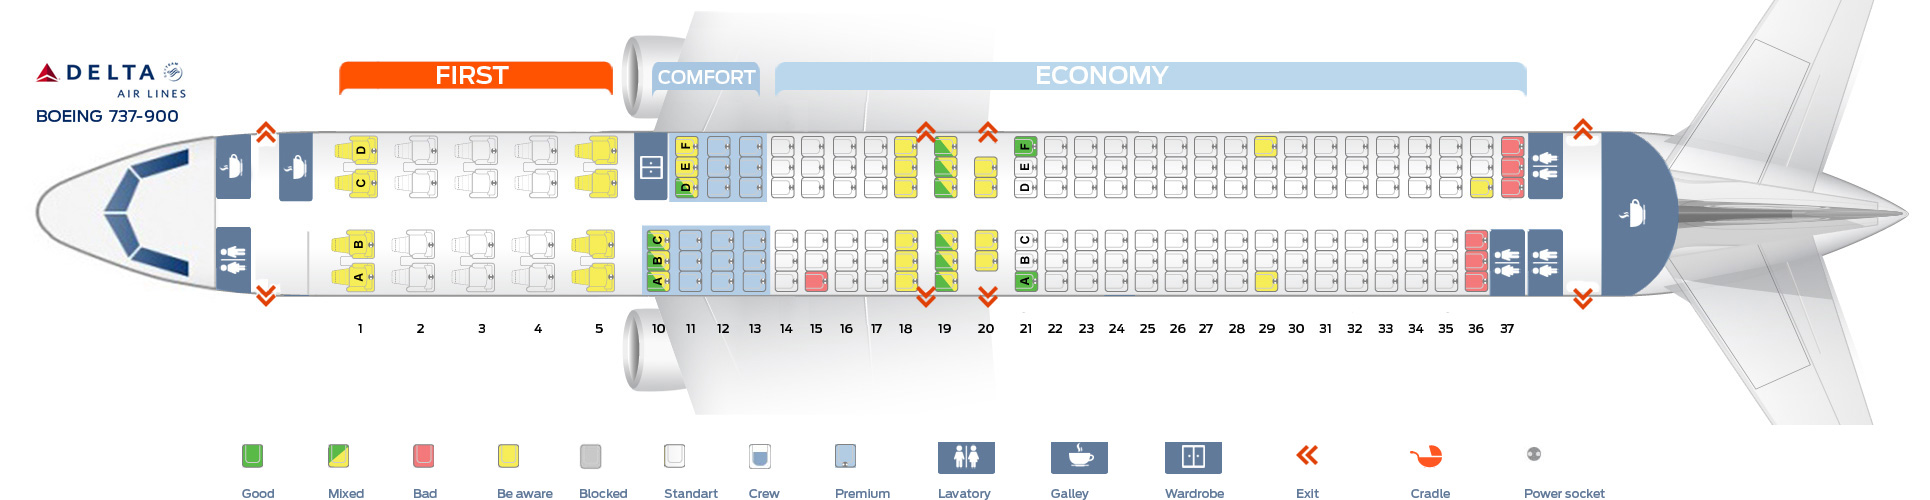 Seat Map Boeing 737 900 Delta Airlines Best Seats In Plane